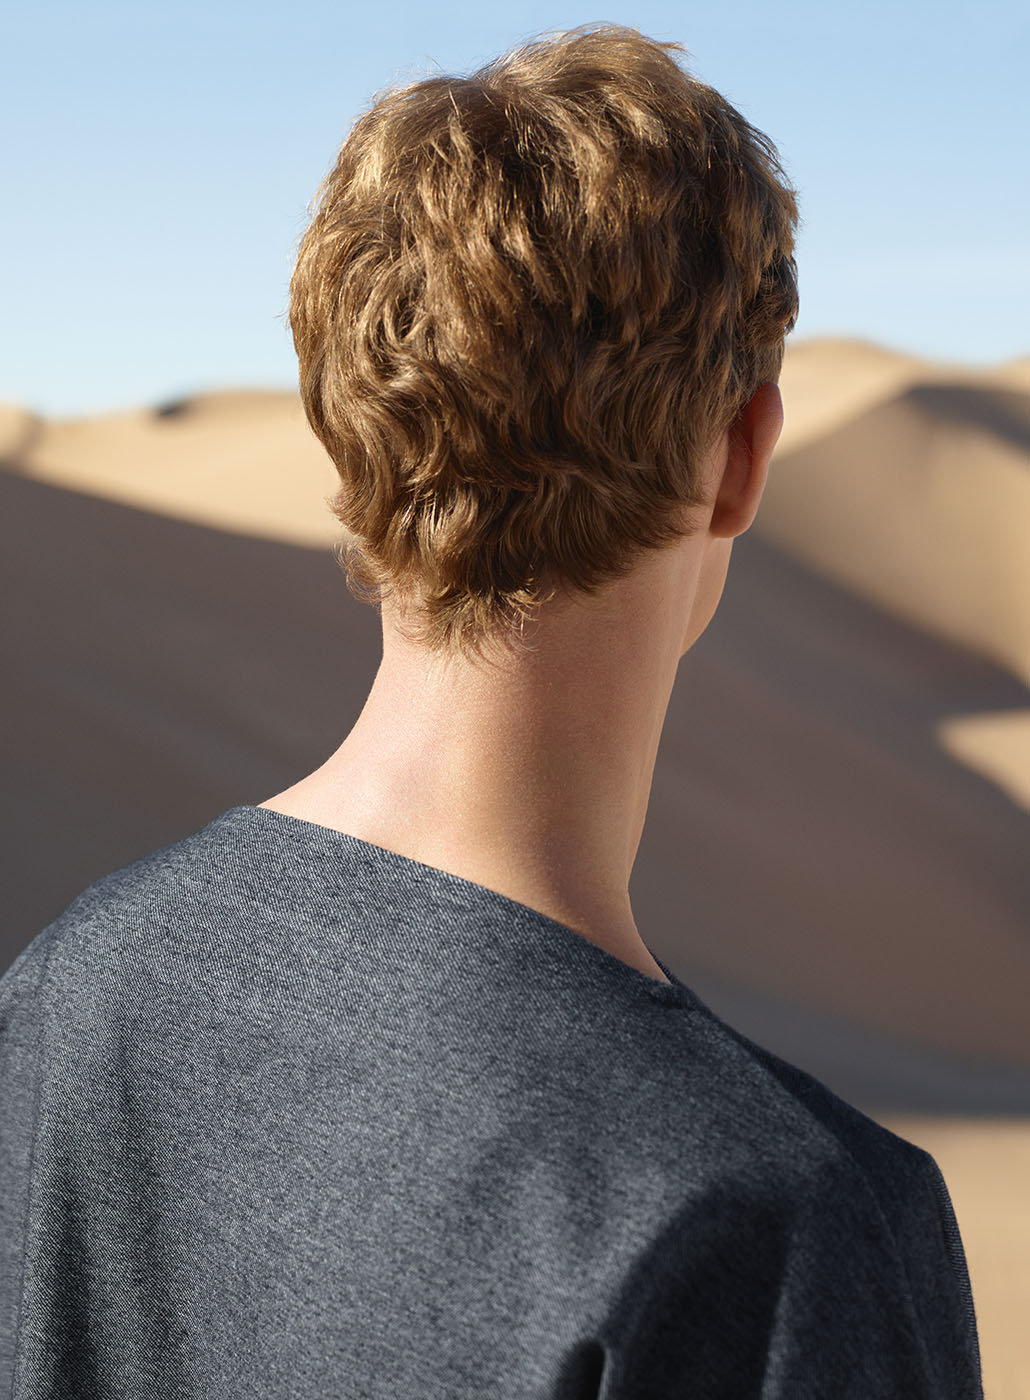 COS summer campaign for men | minimalistic fashion shooting in the desert